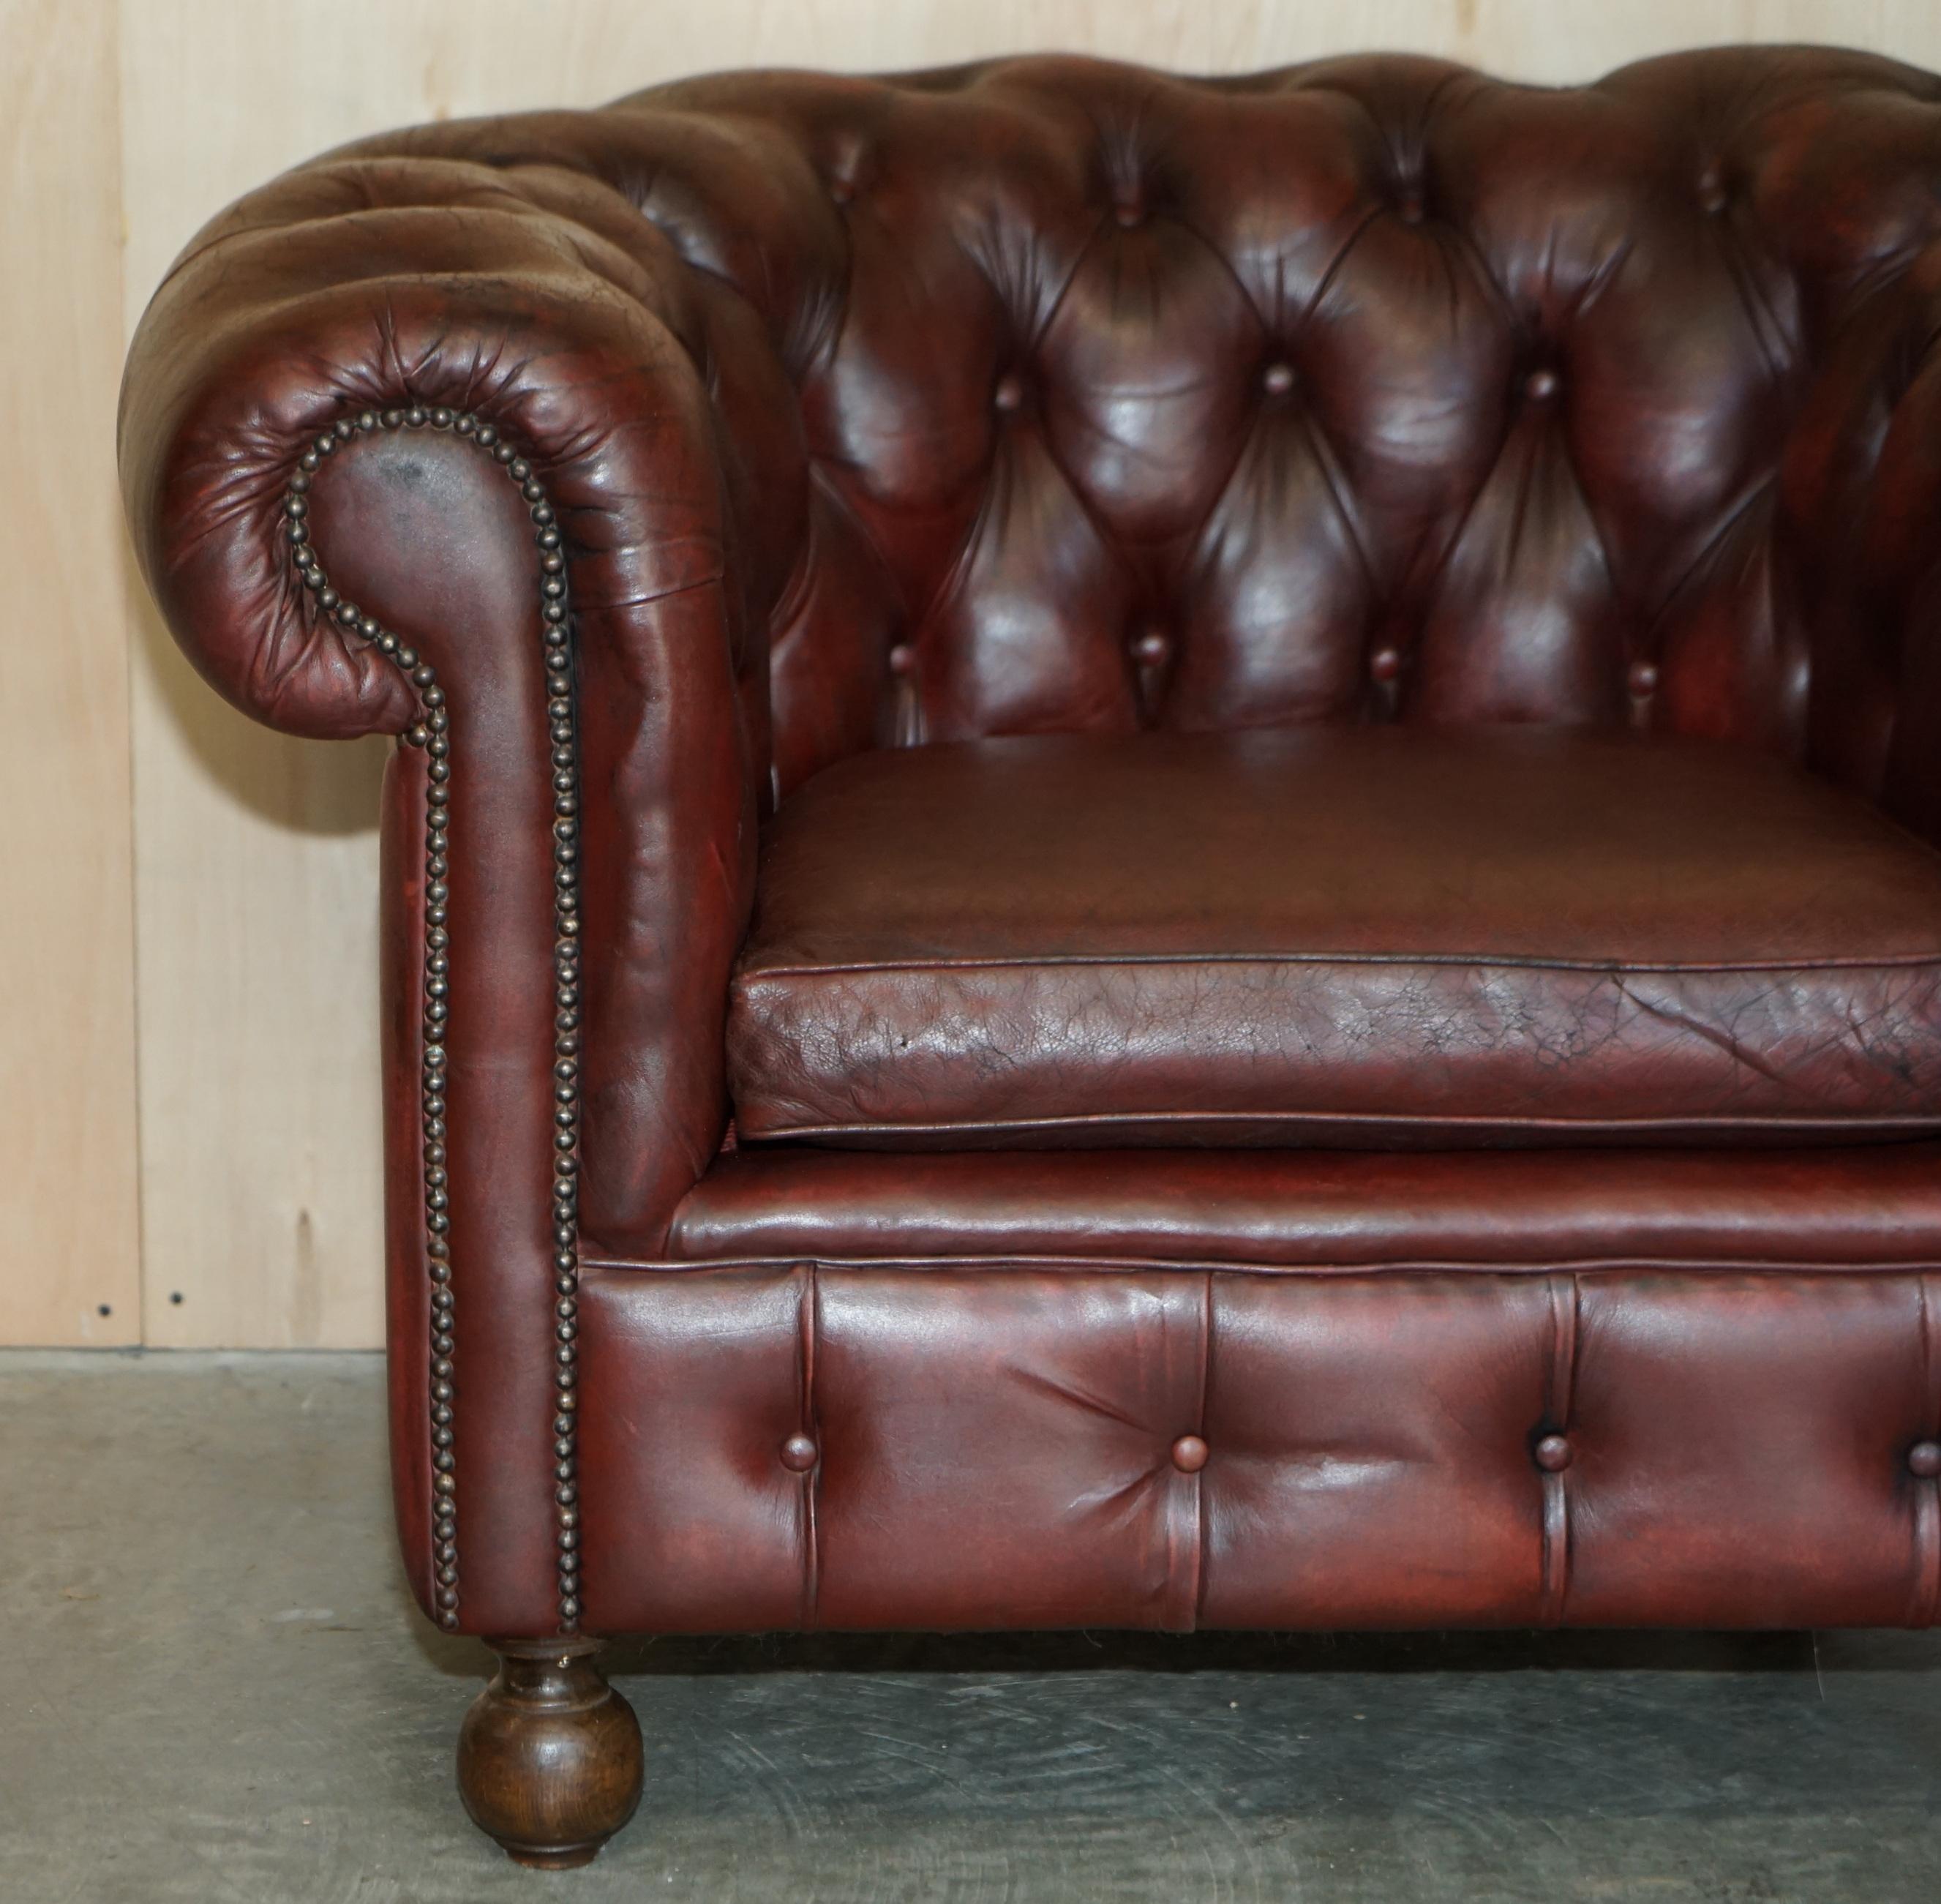 Leather PAIR OF LOVELY ANTIQUE OXBLOOD LEATHER CHESTERFIELD GENTLEMAN'S CLUB ARMCHAiRS For Sale